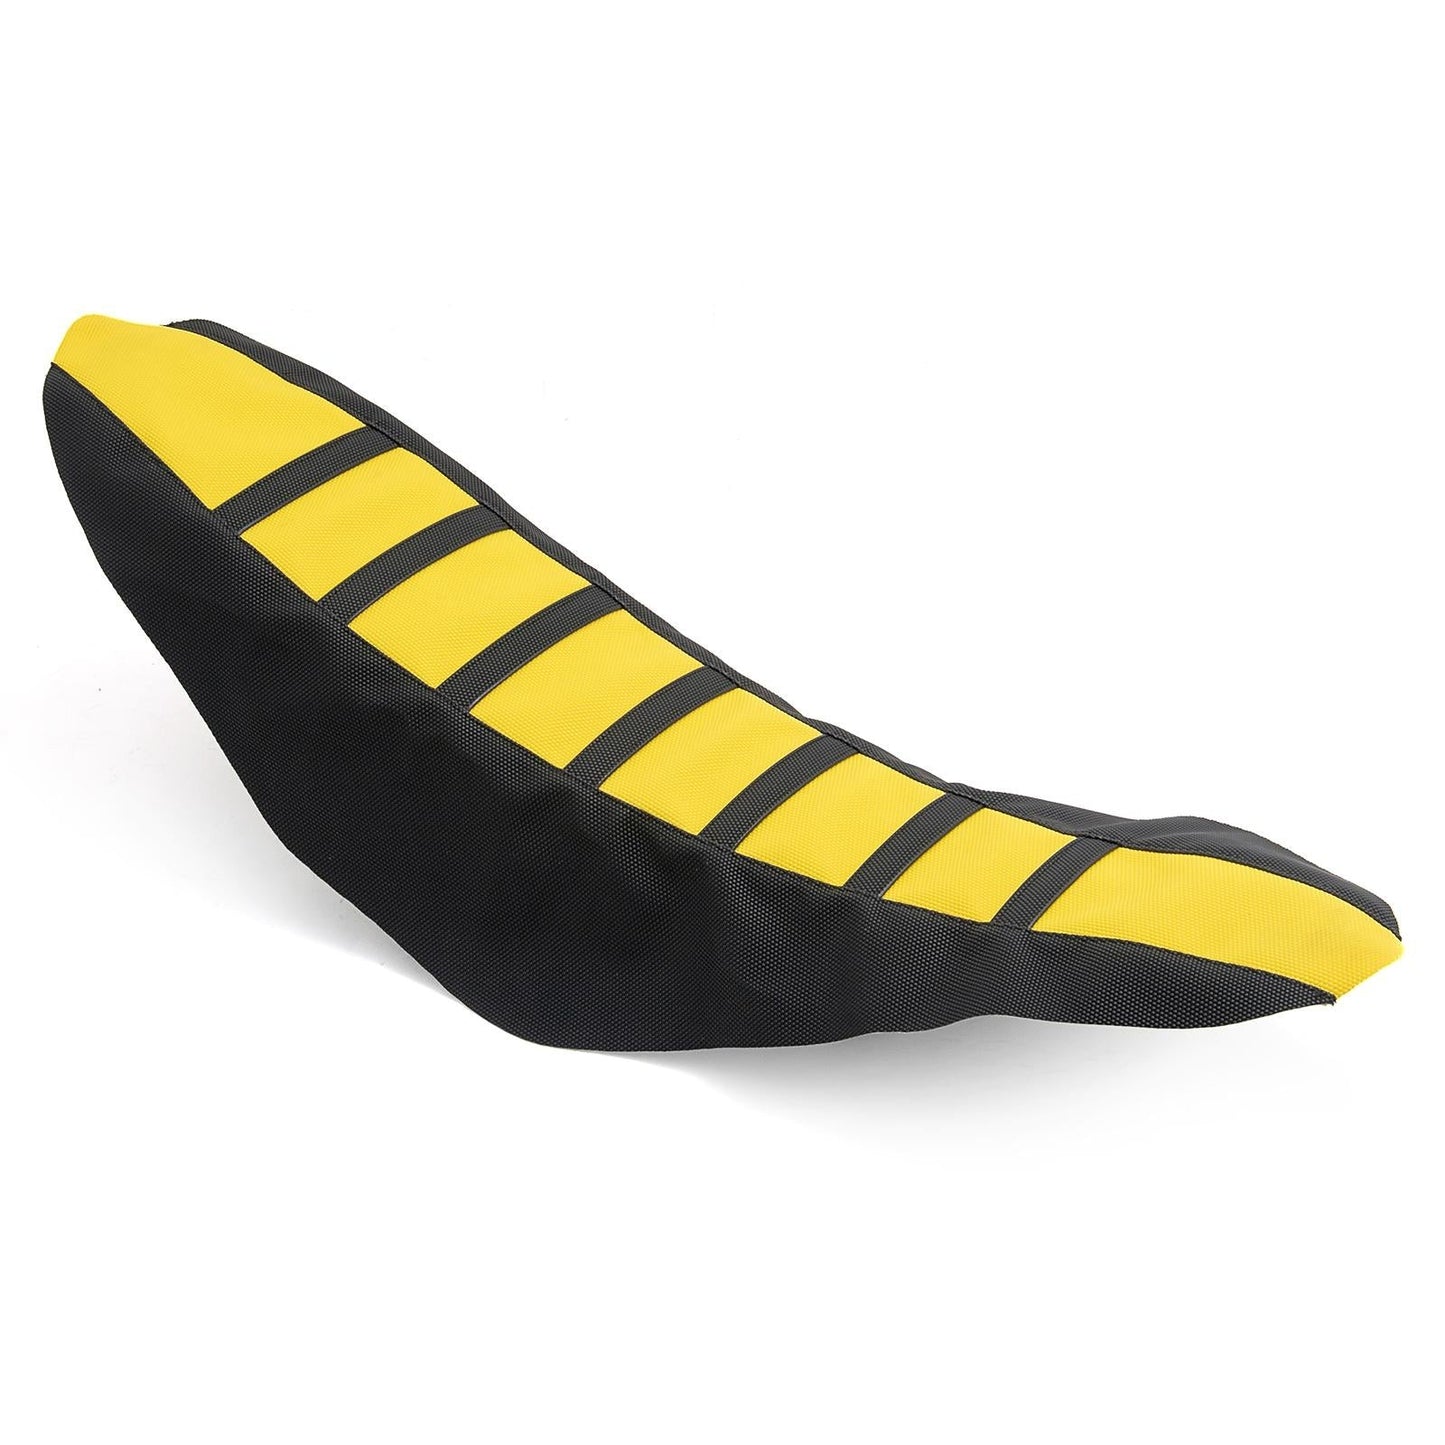 Sur-Ron Storm Bee Custom Higher Grip Seat Cover